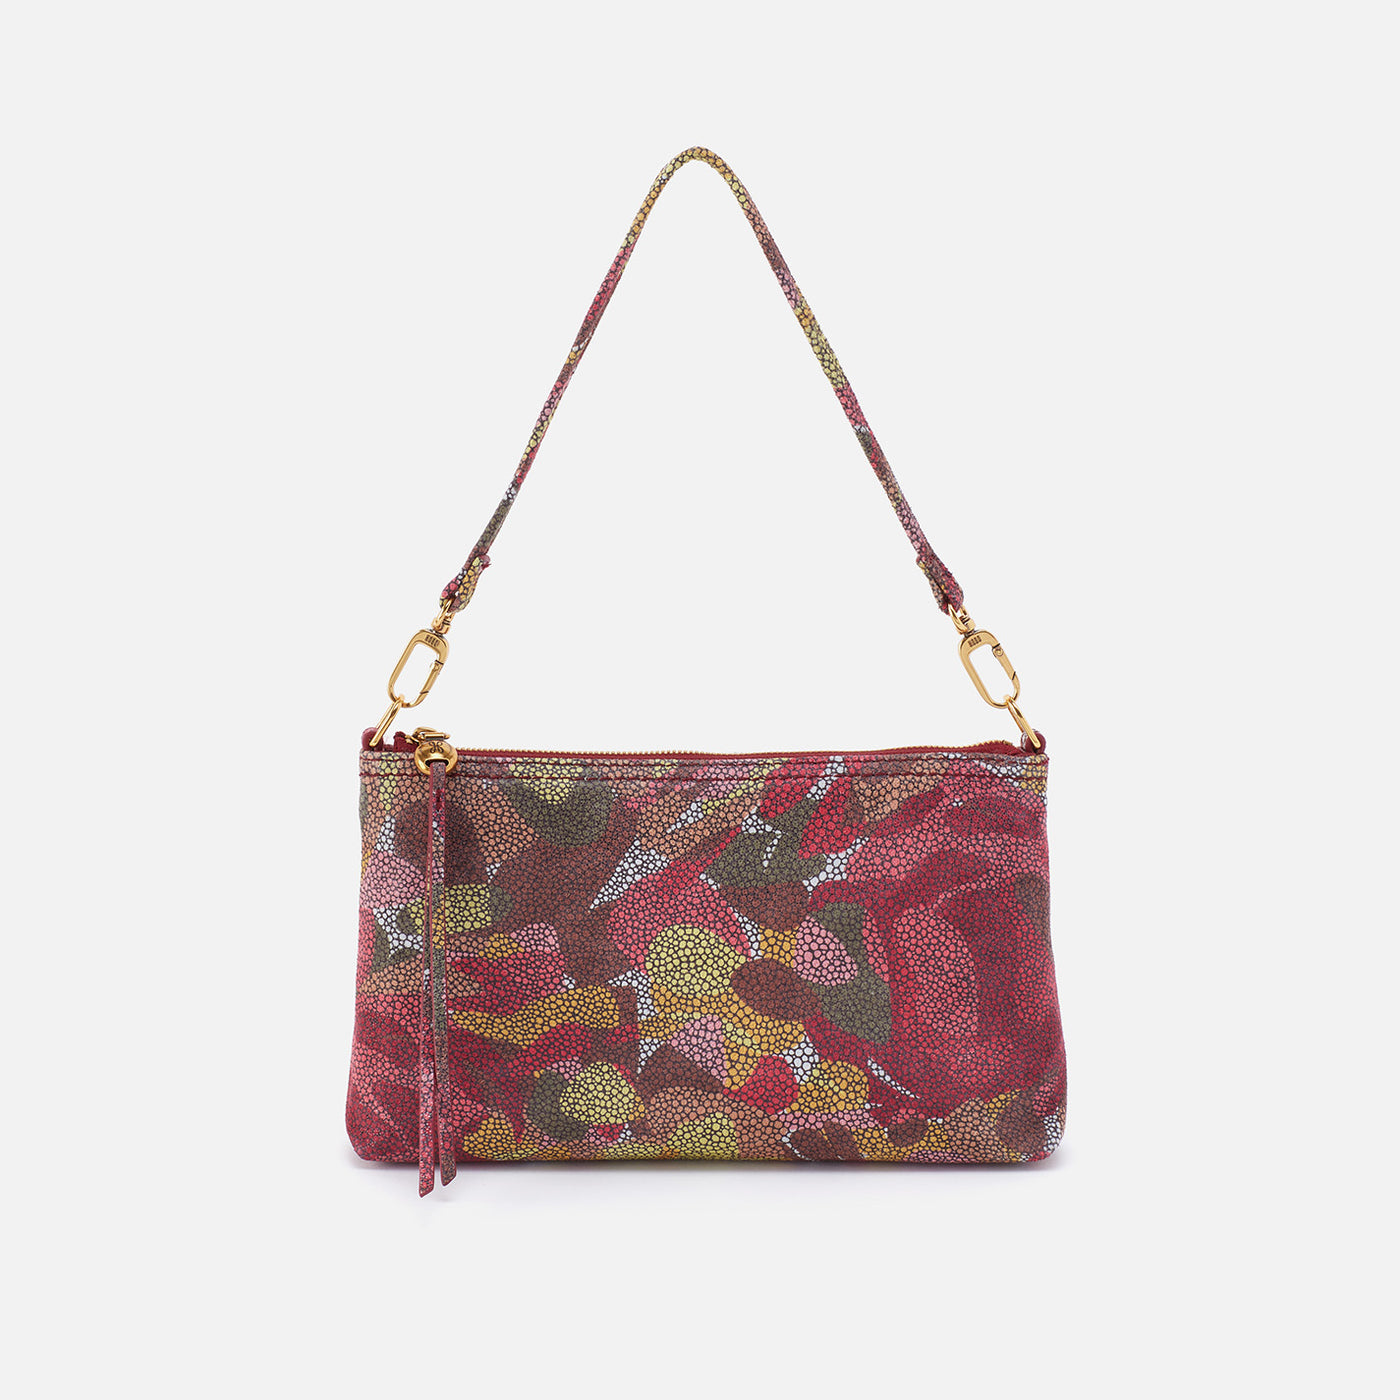 Darcy Crossbody in Printed Leather - Abstract Foliage